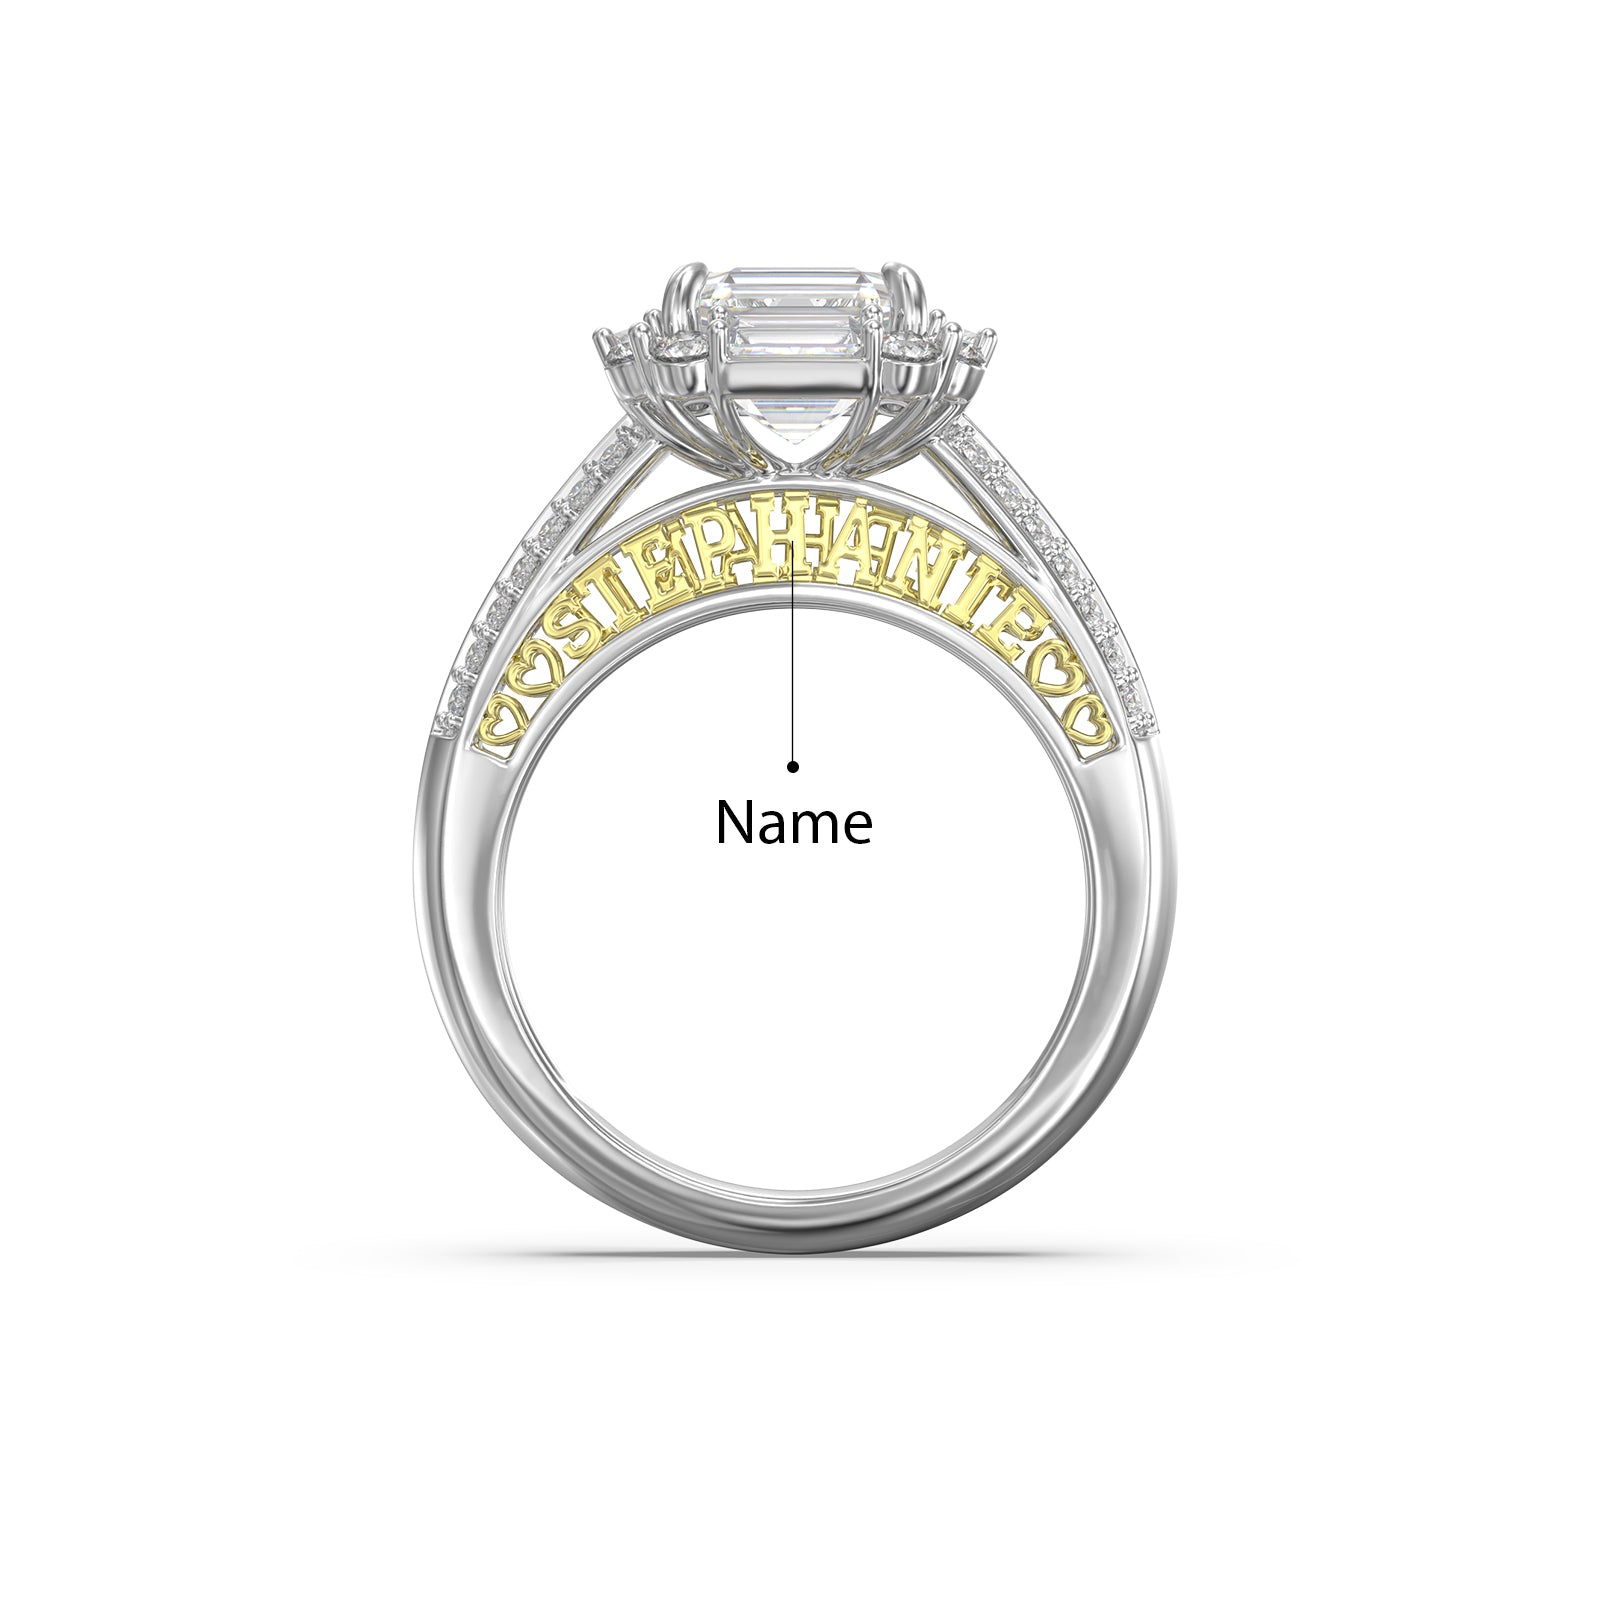 ThinkEngraved Womens Wedding Rings Personalized Women's Wedding Engagement Ring 2ct Pillow Cut Solitaire.